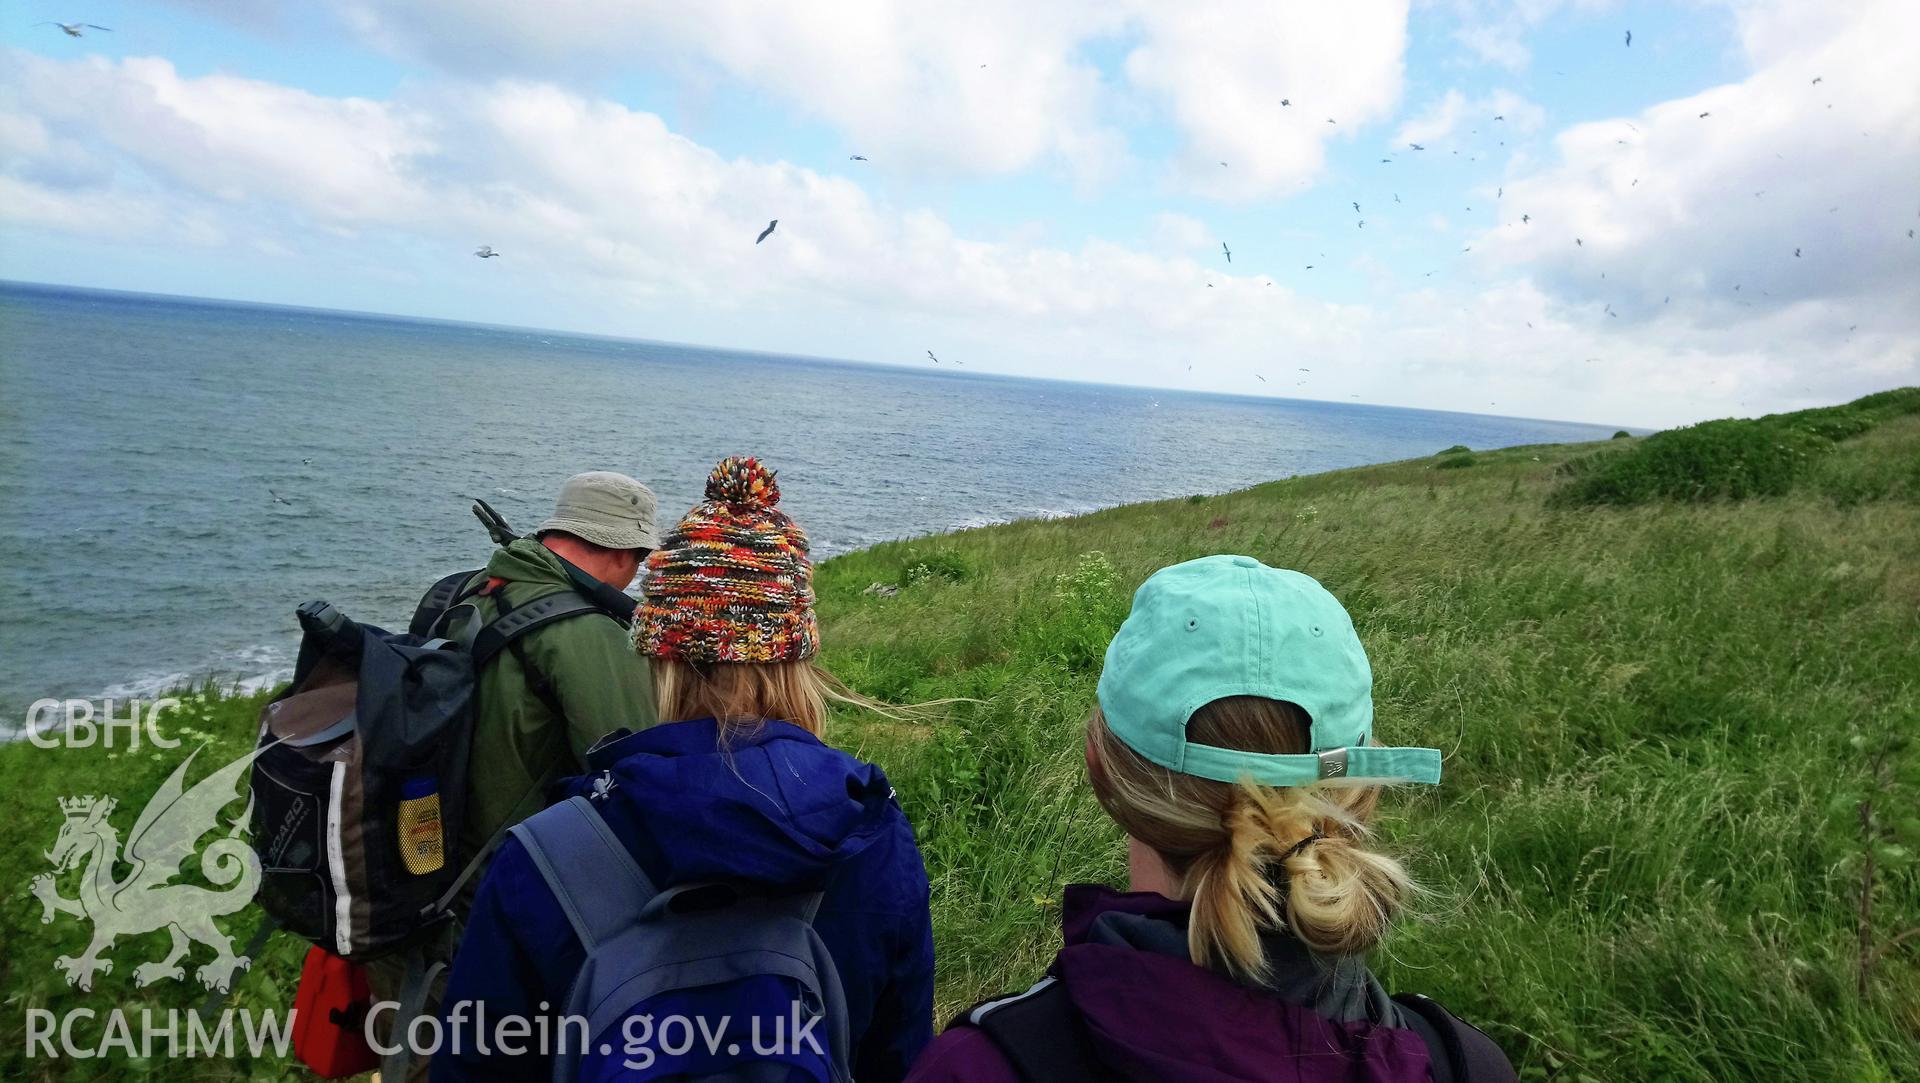 Investigator's photographic survey of Puffin Island or Ynys Seiriol for the CHERISH Project. ? Crown: CHERISH PROJECT 2018. Produced with EU funds through the Ireland Wales Co-operation Programme 2014-2020. All material made freely available through the Open Government Licence.